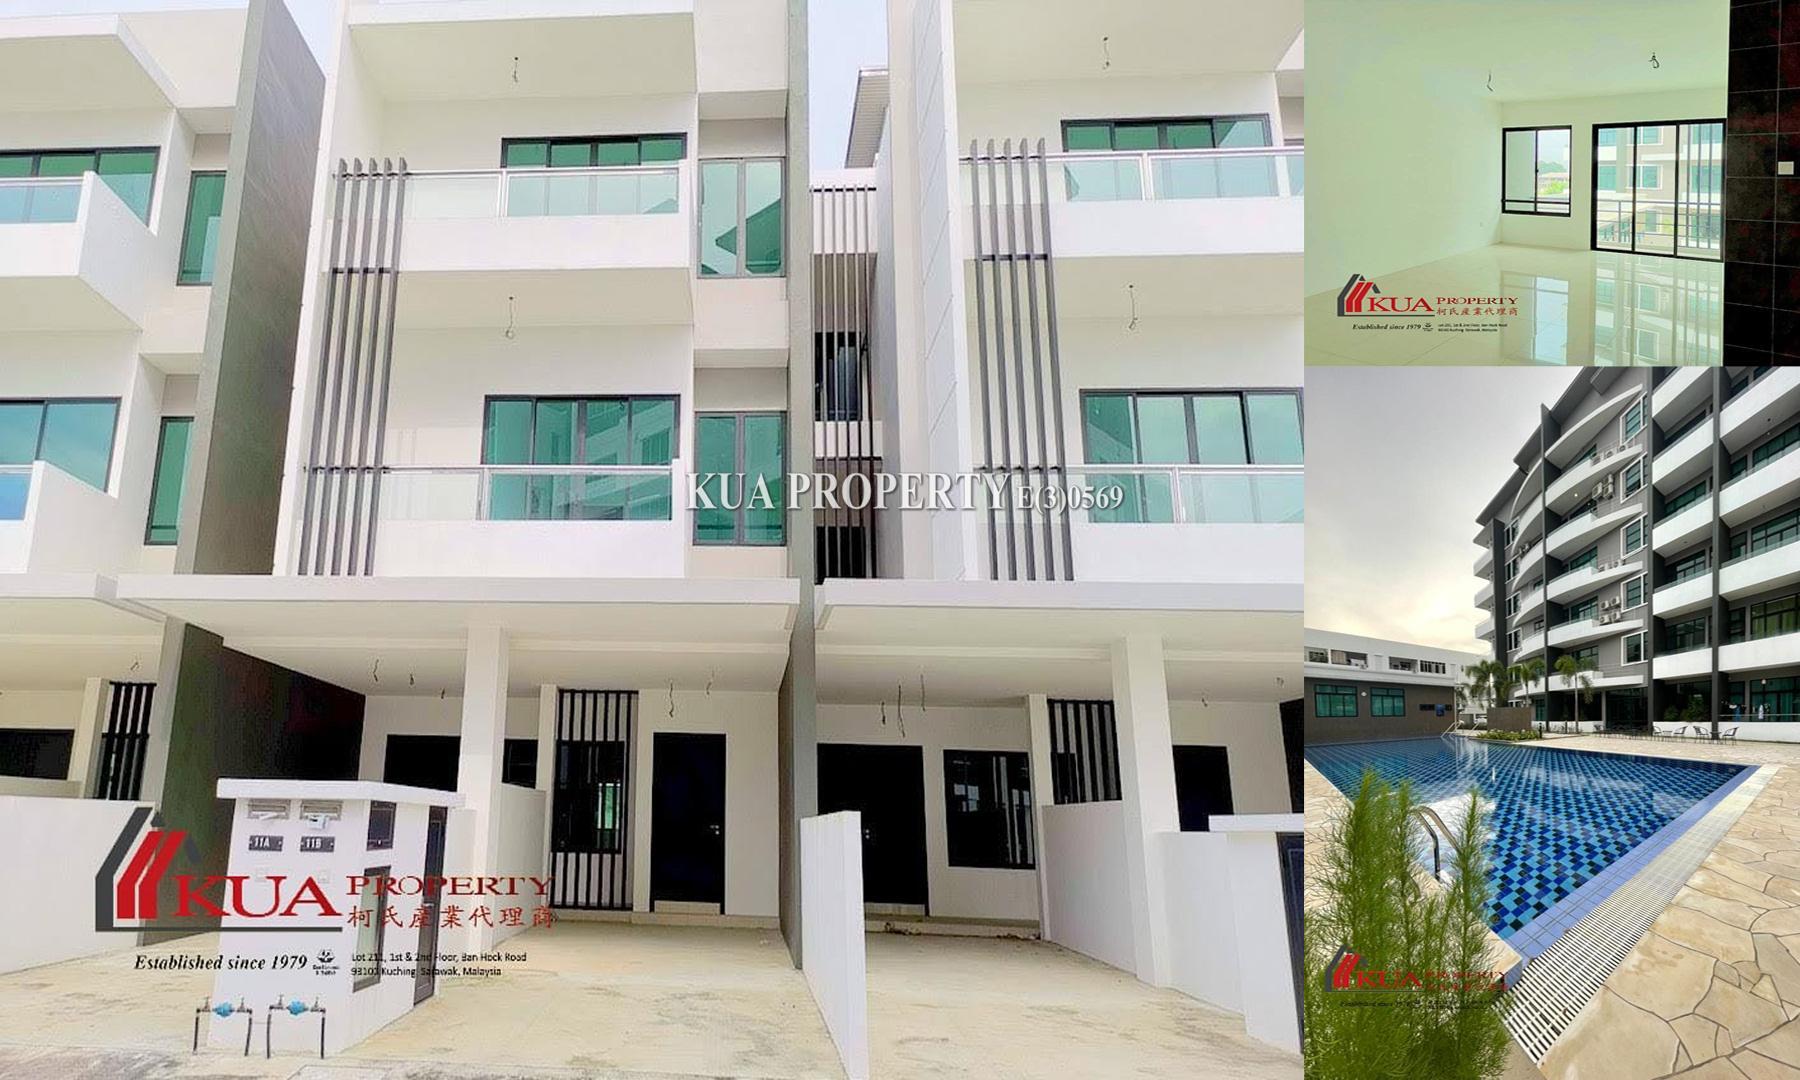 Kuching City Mall D’Belle Residence Townhouse Upper Unit For Sale!